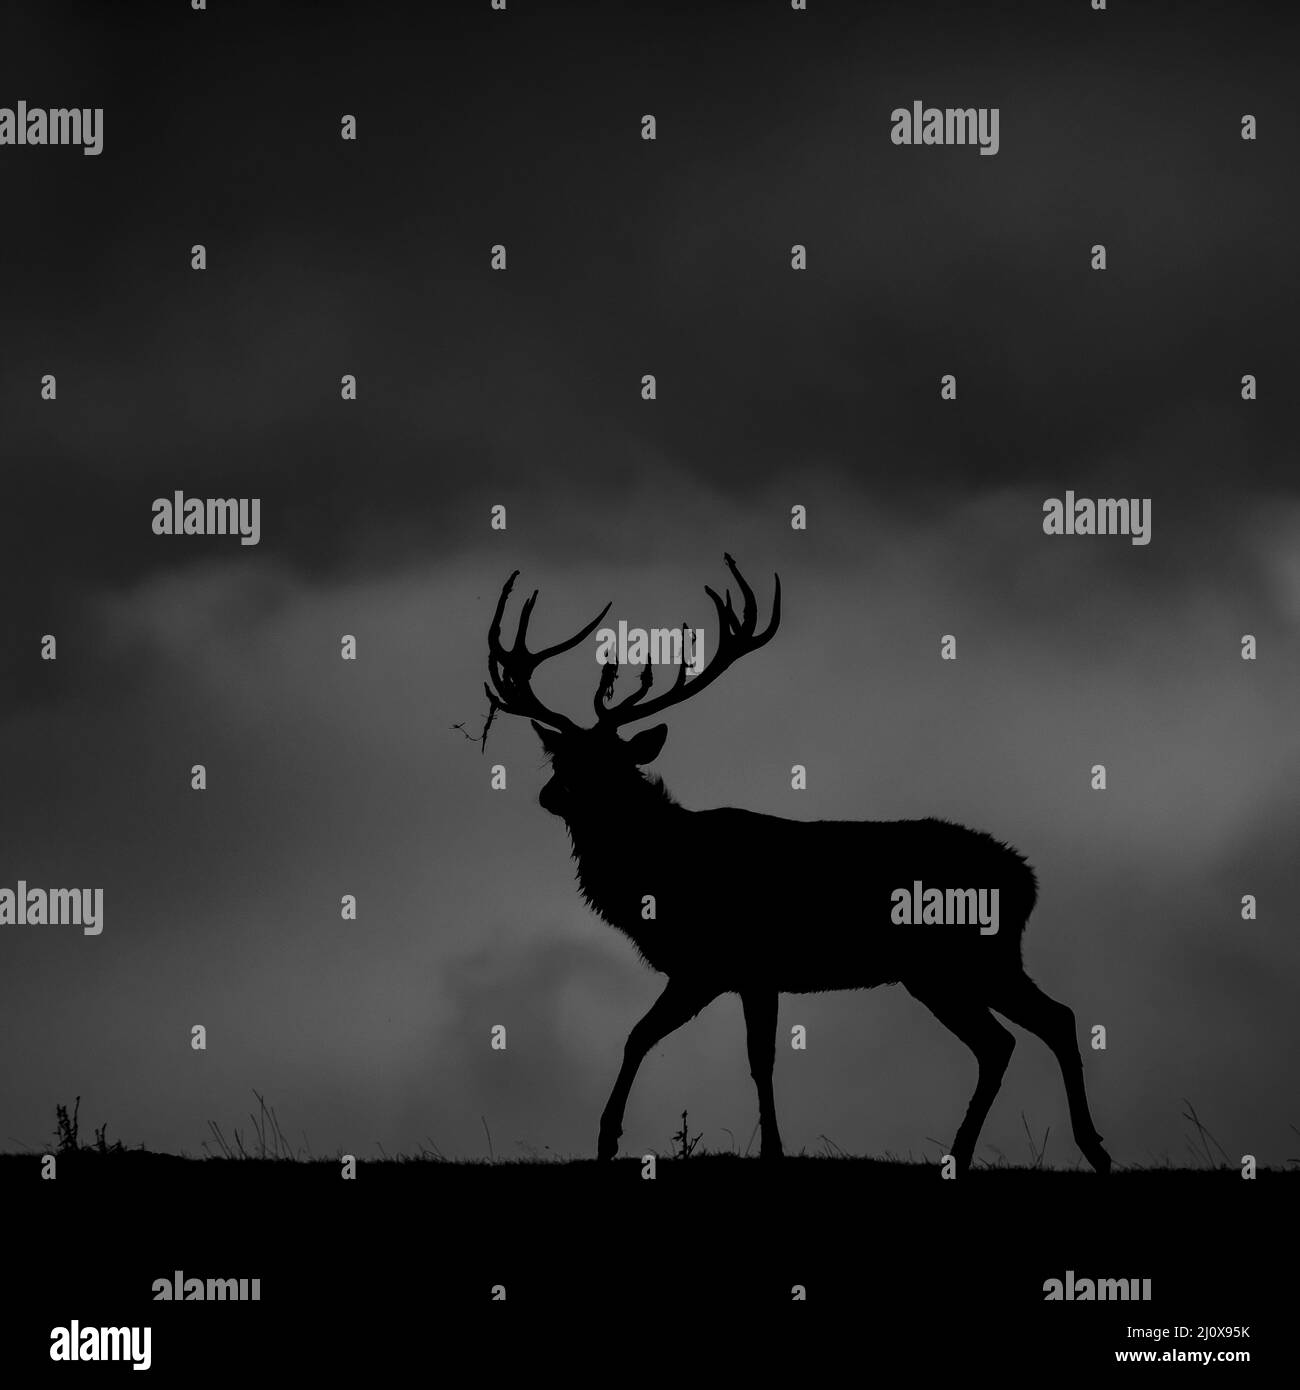 Black and white silhouette shot of a reindeer standing alone under a cloudy and dark sky Stock Photo